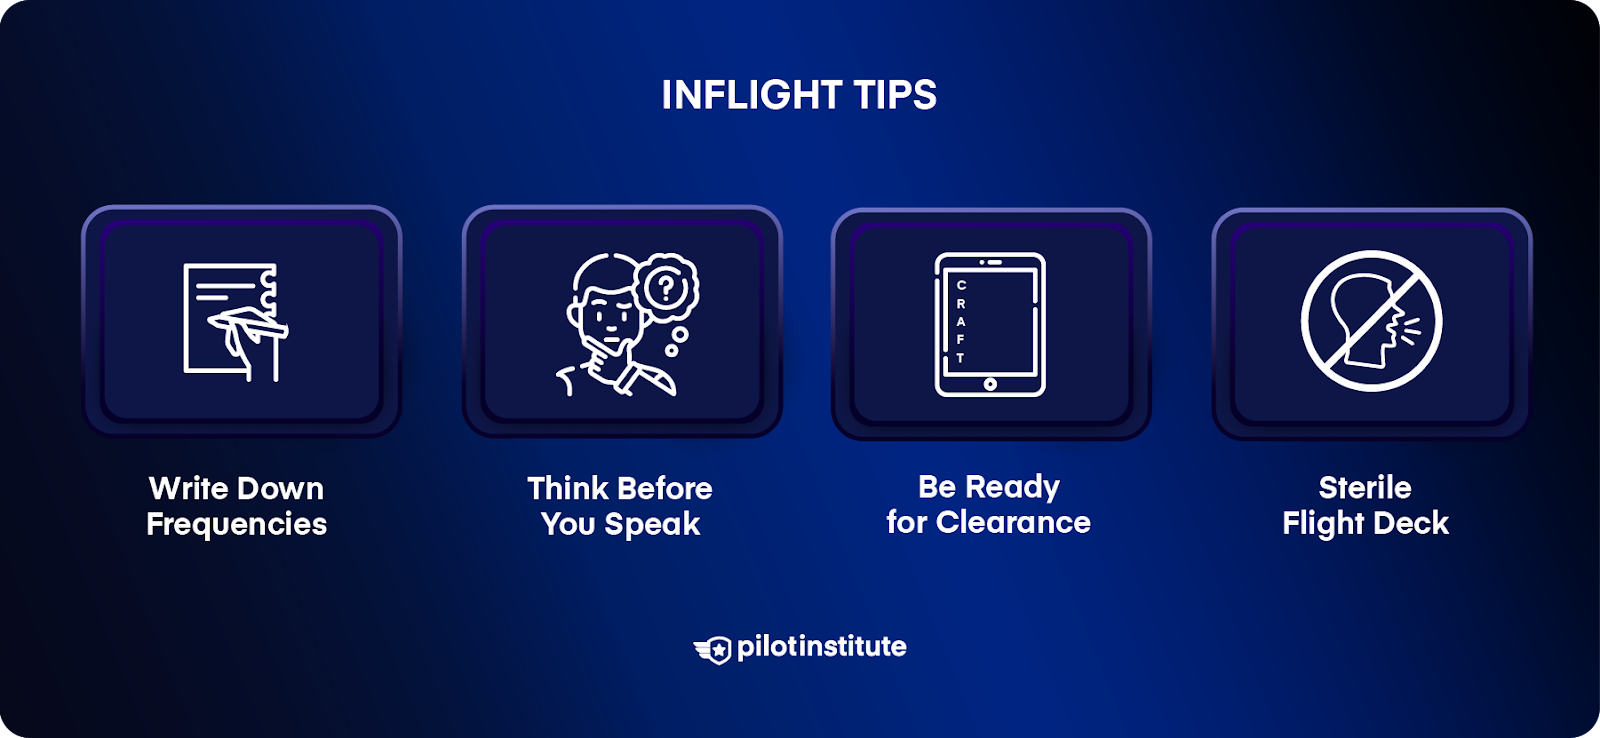 Inflight Tips infographic.